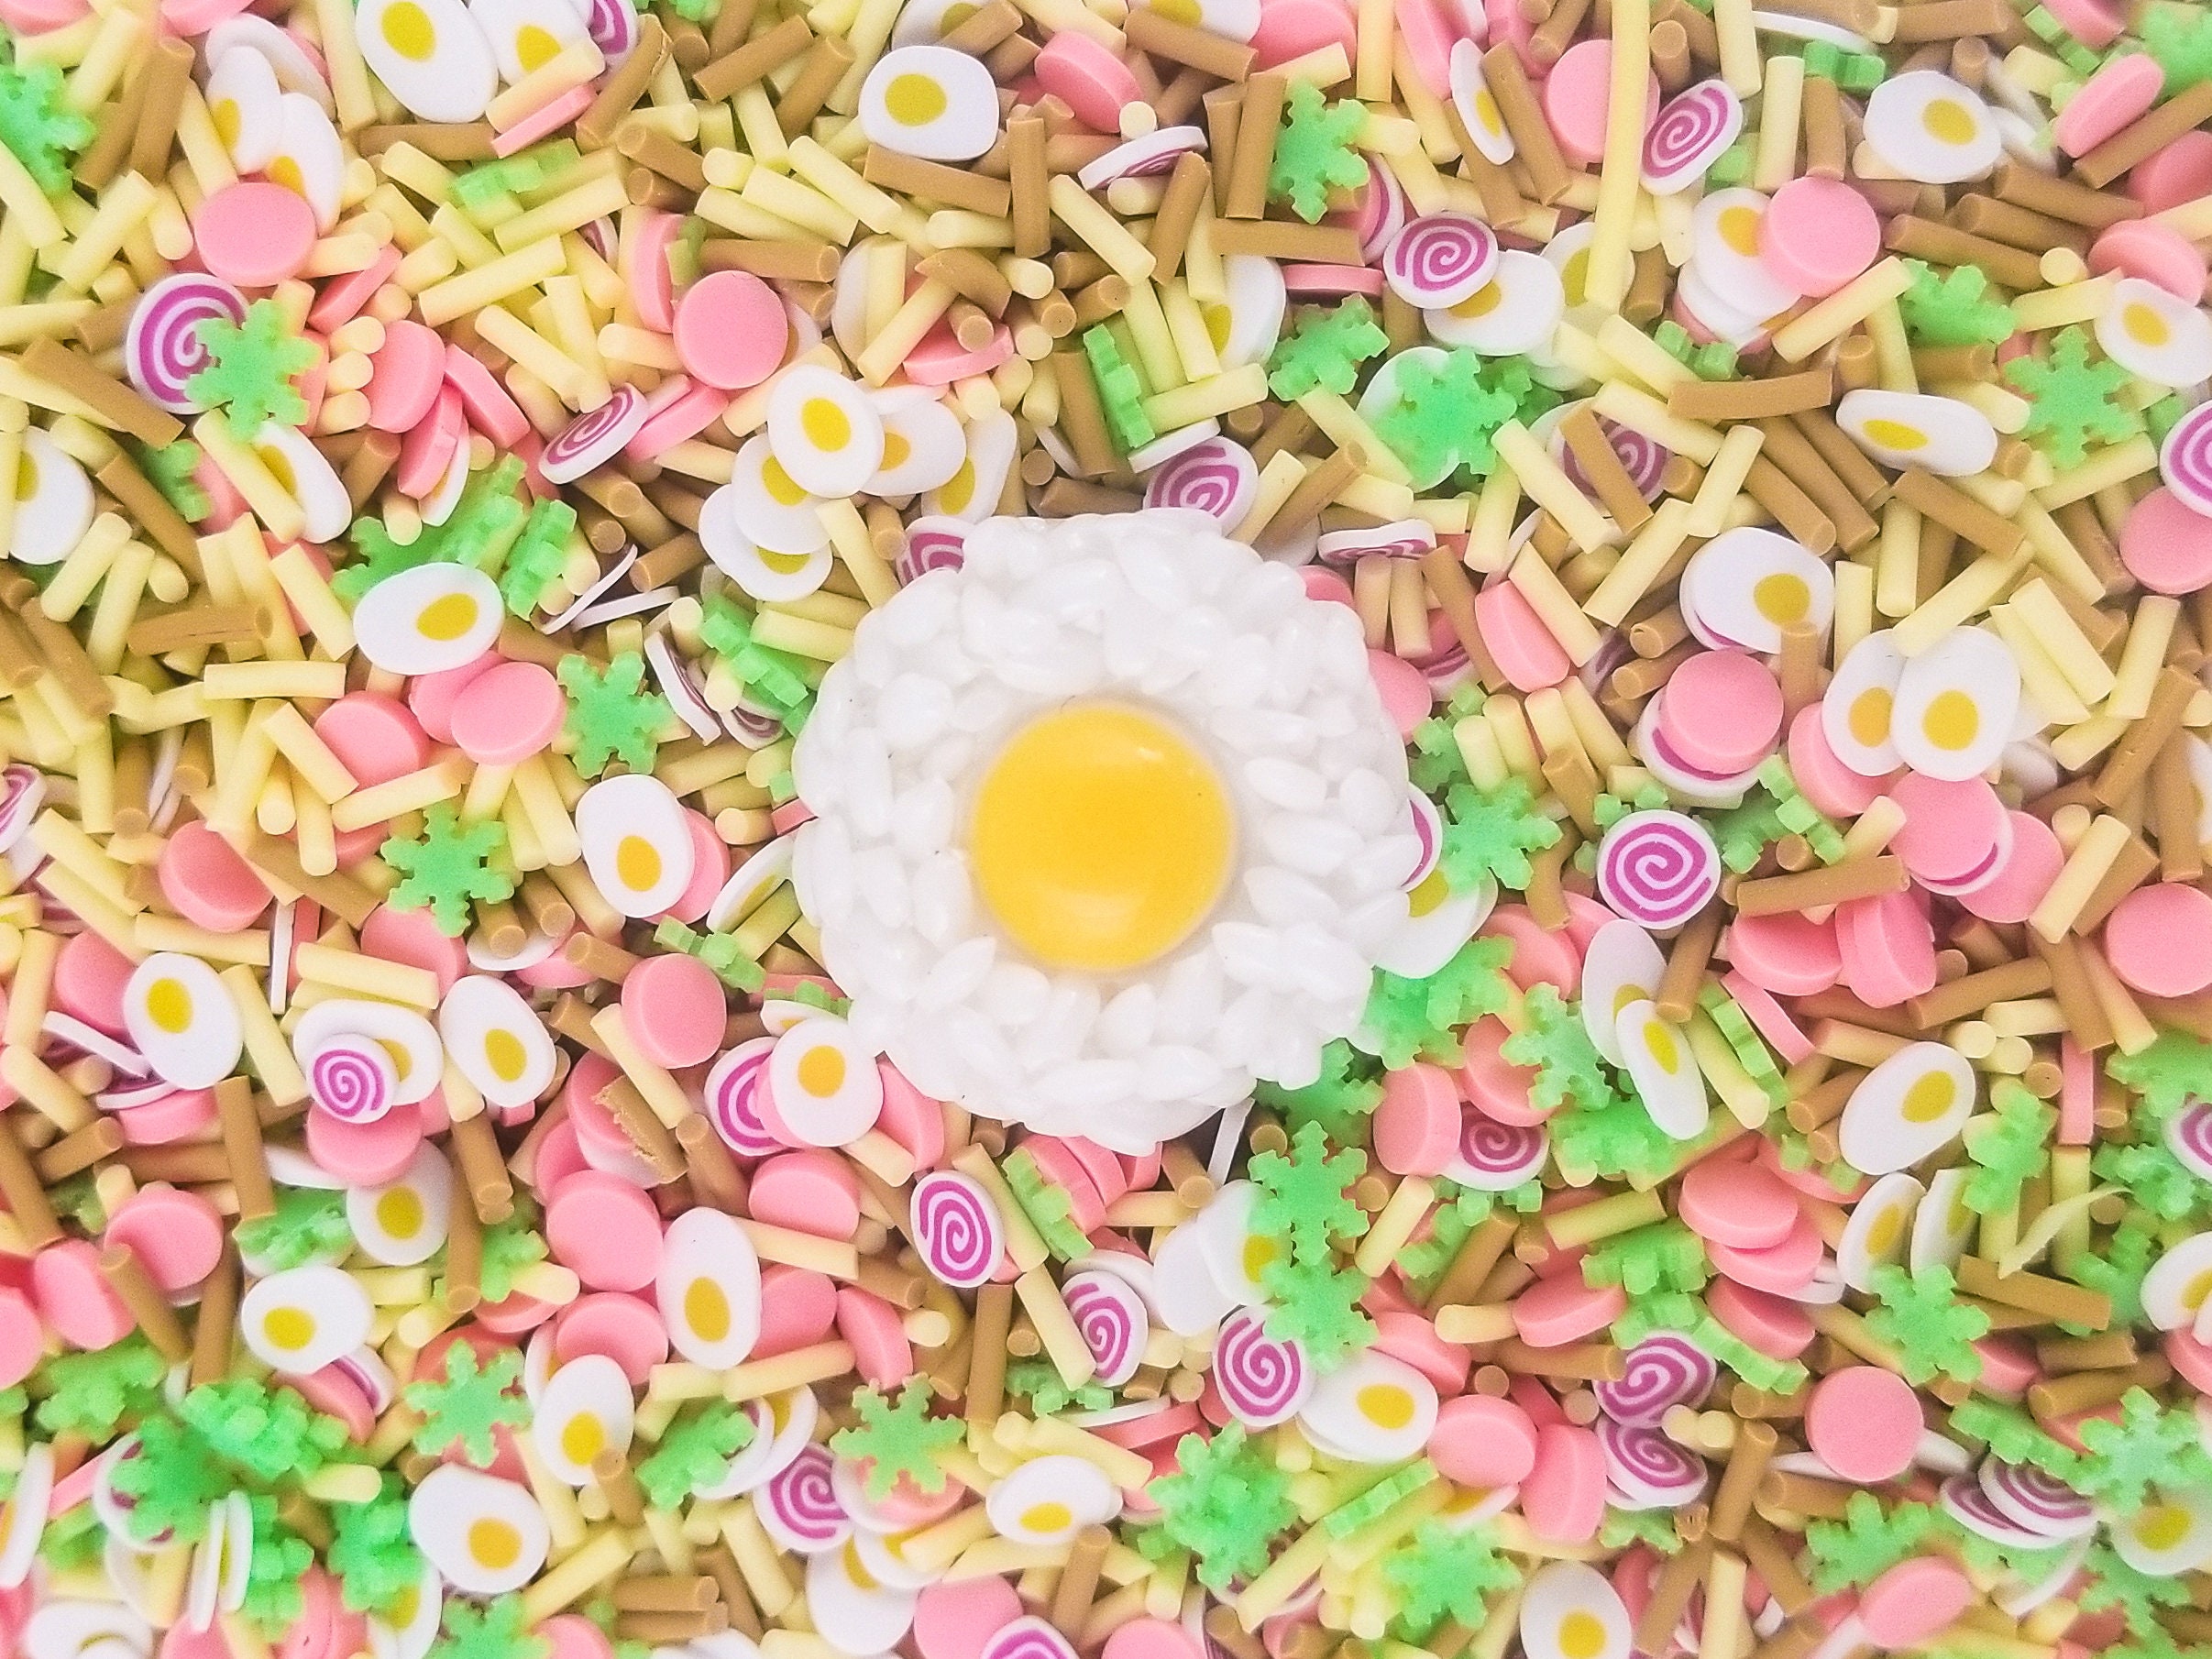 Ramen Noodle Time Sprinkle Mix With 1 Egg & Rice Cab, Polymer Clay Fake Sprinkles, Decoden Funfetti Jimmies E217